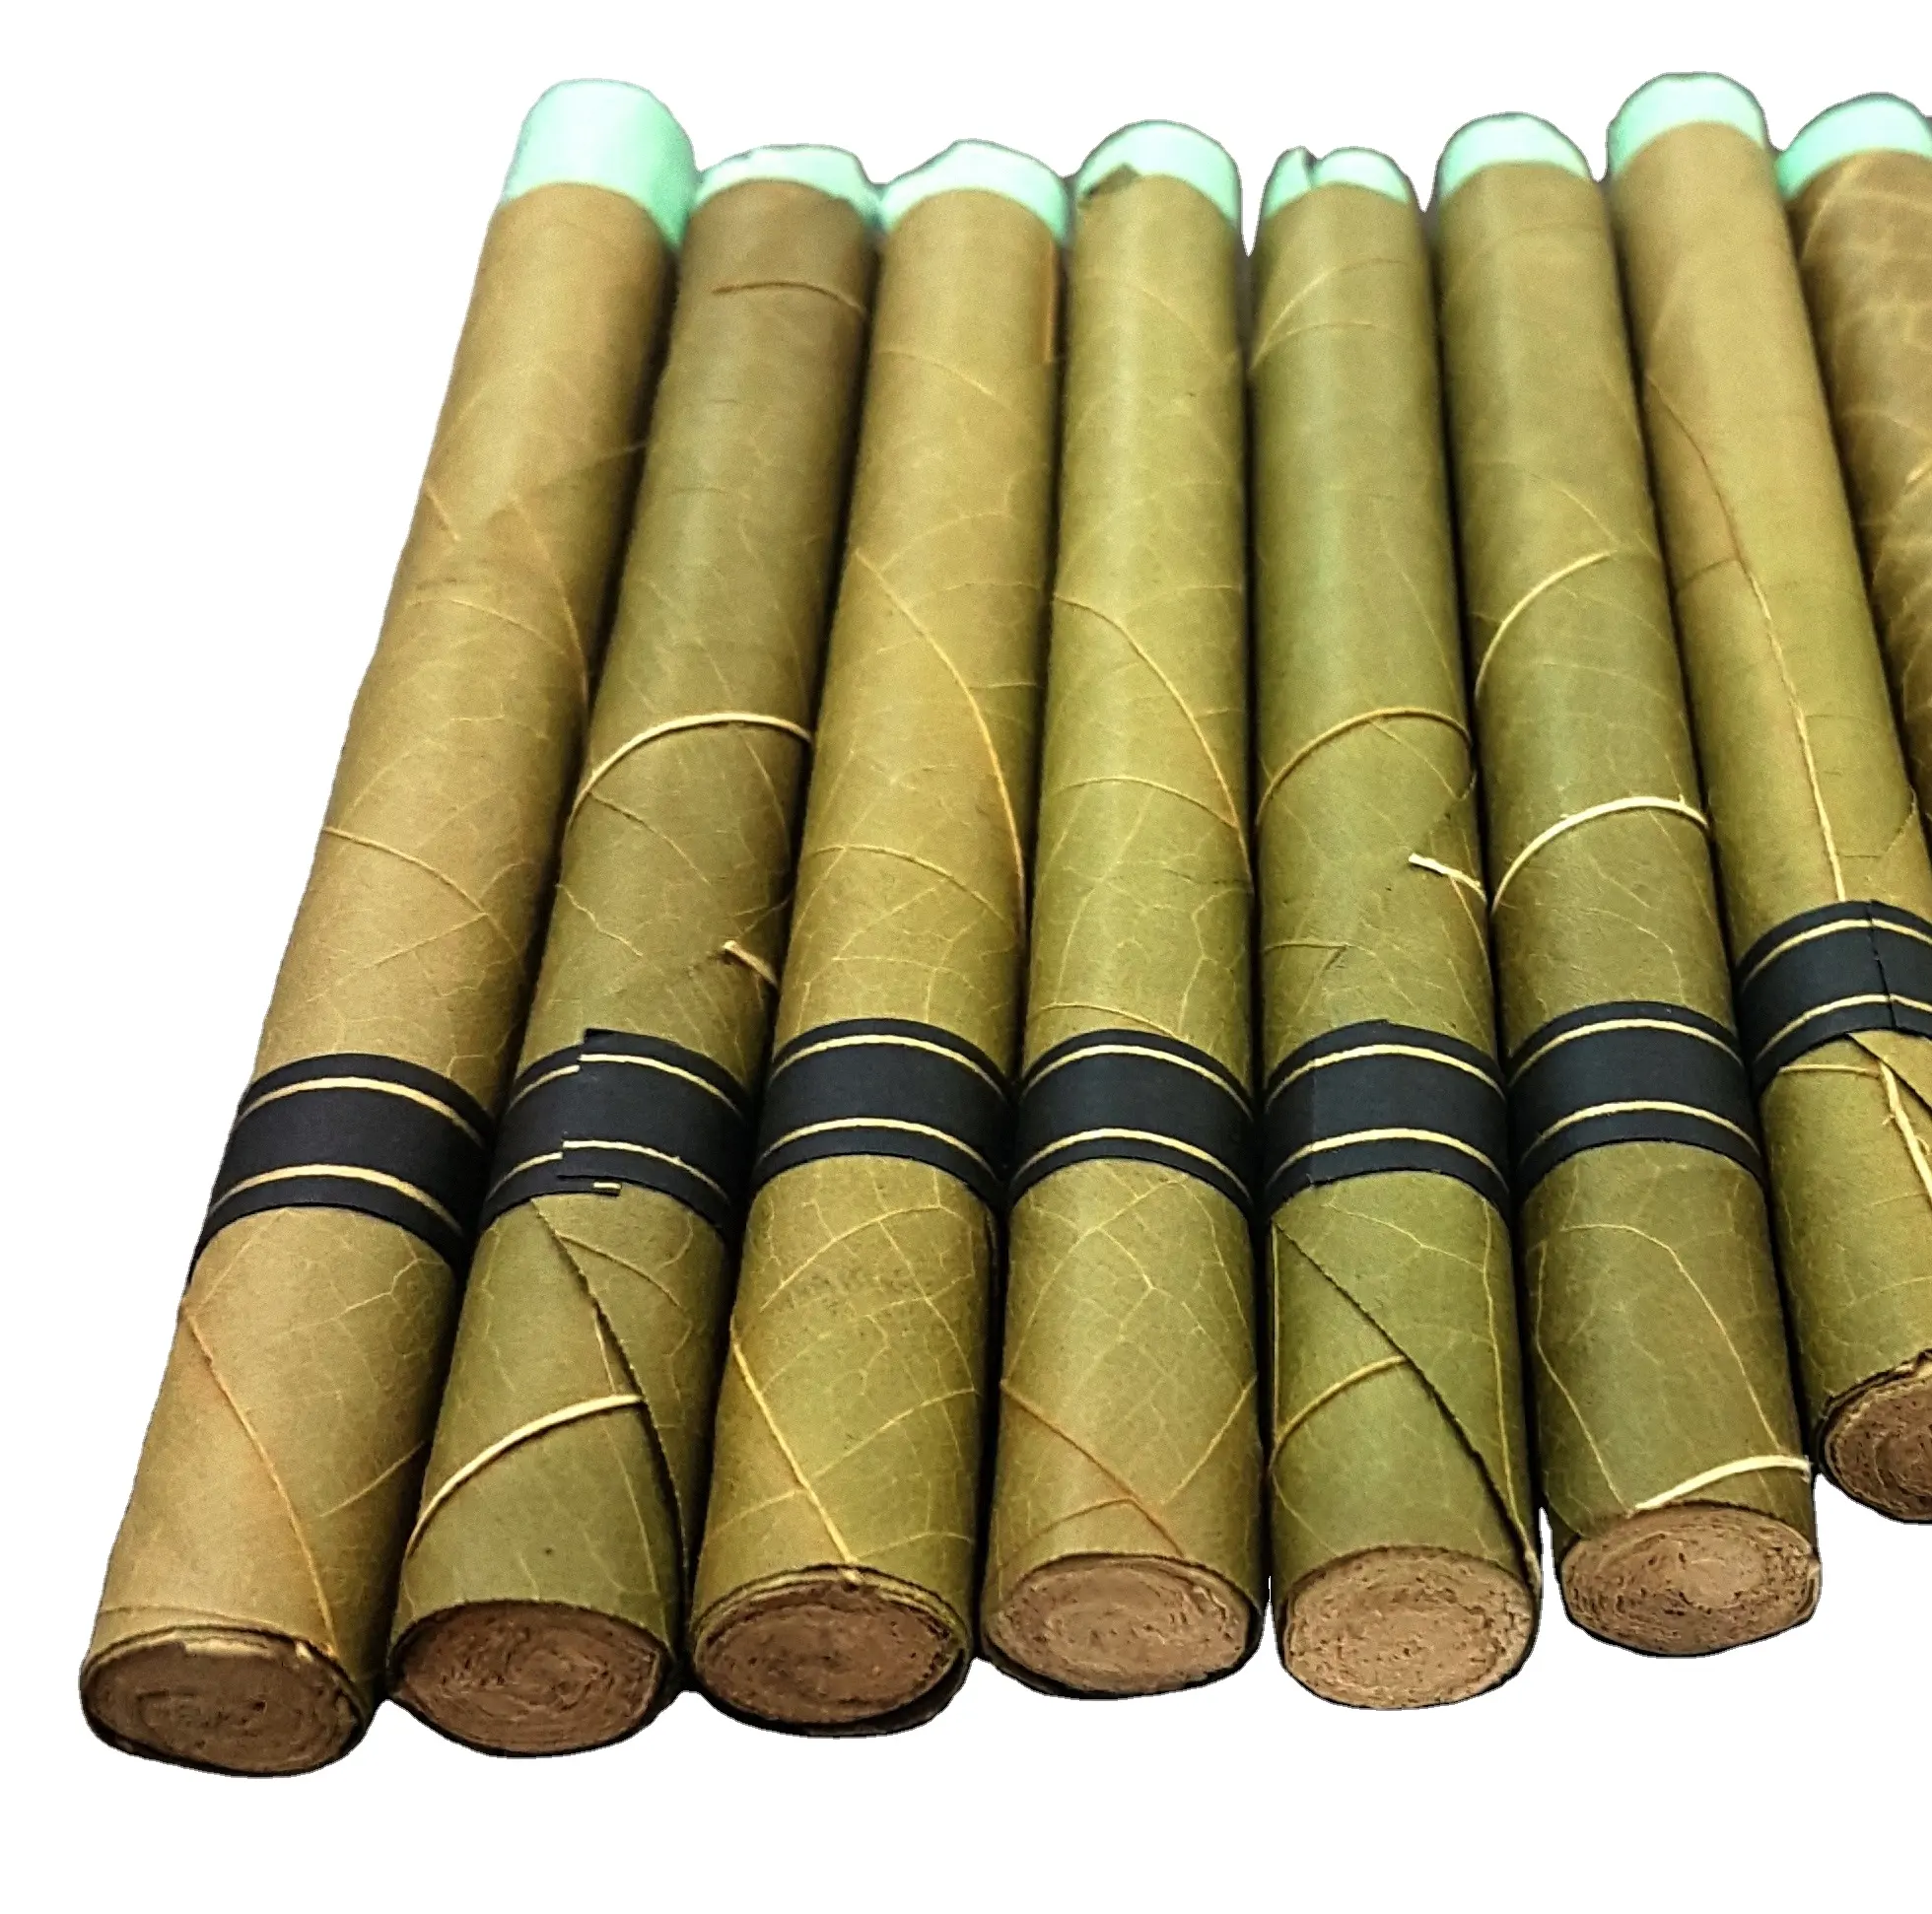 Handmade Palm Leaf rolls in custom size 4 USA Bulk best prices rolls in corn husk filters wood tips & glass tips hand rolled